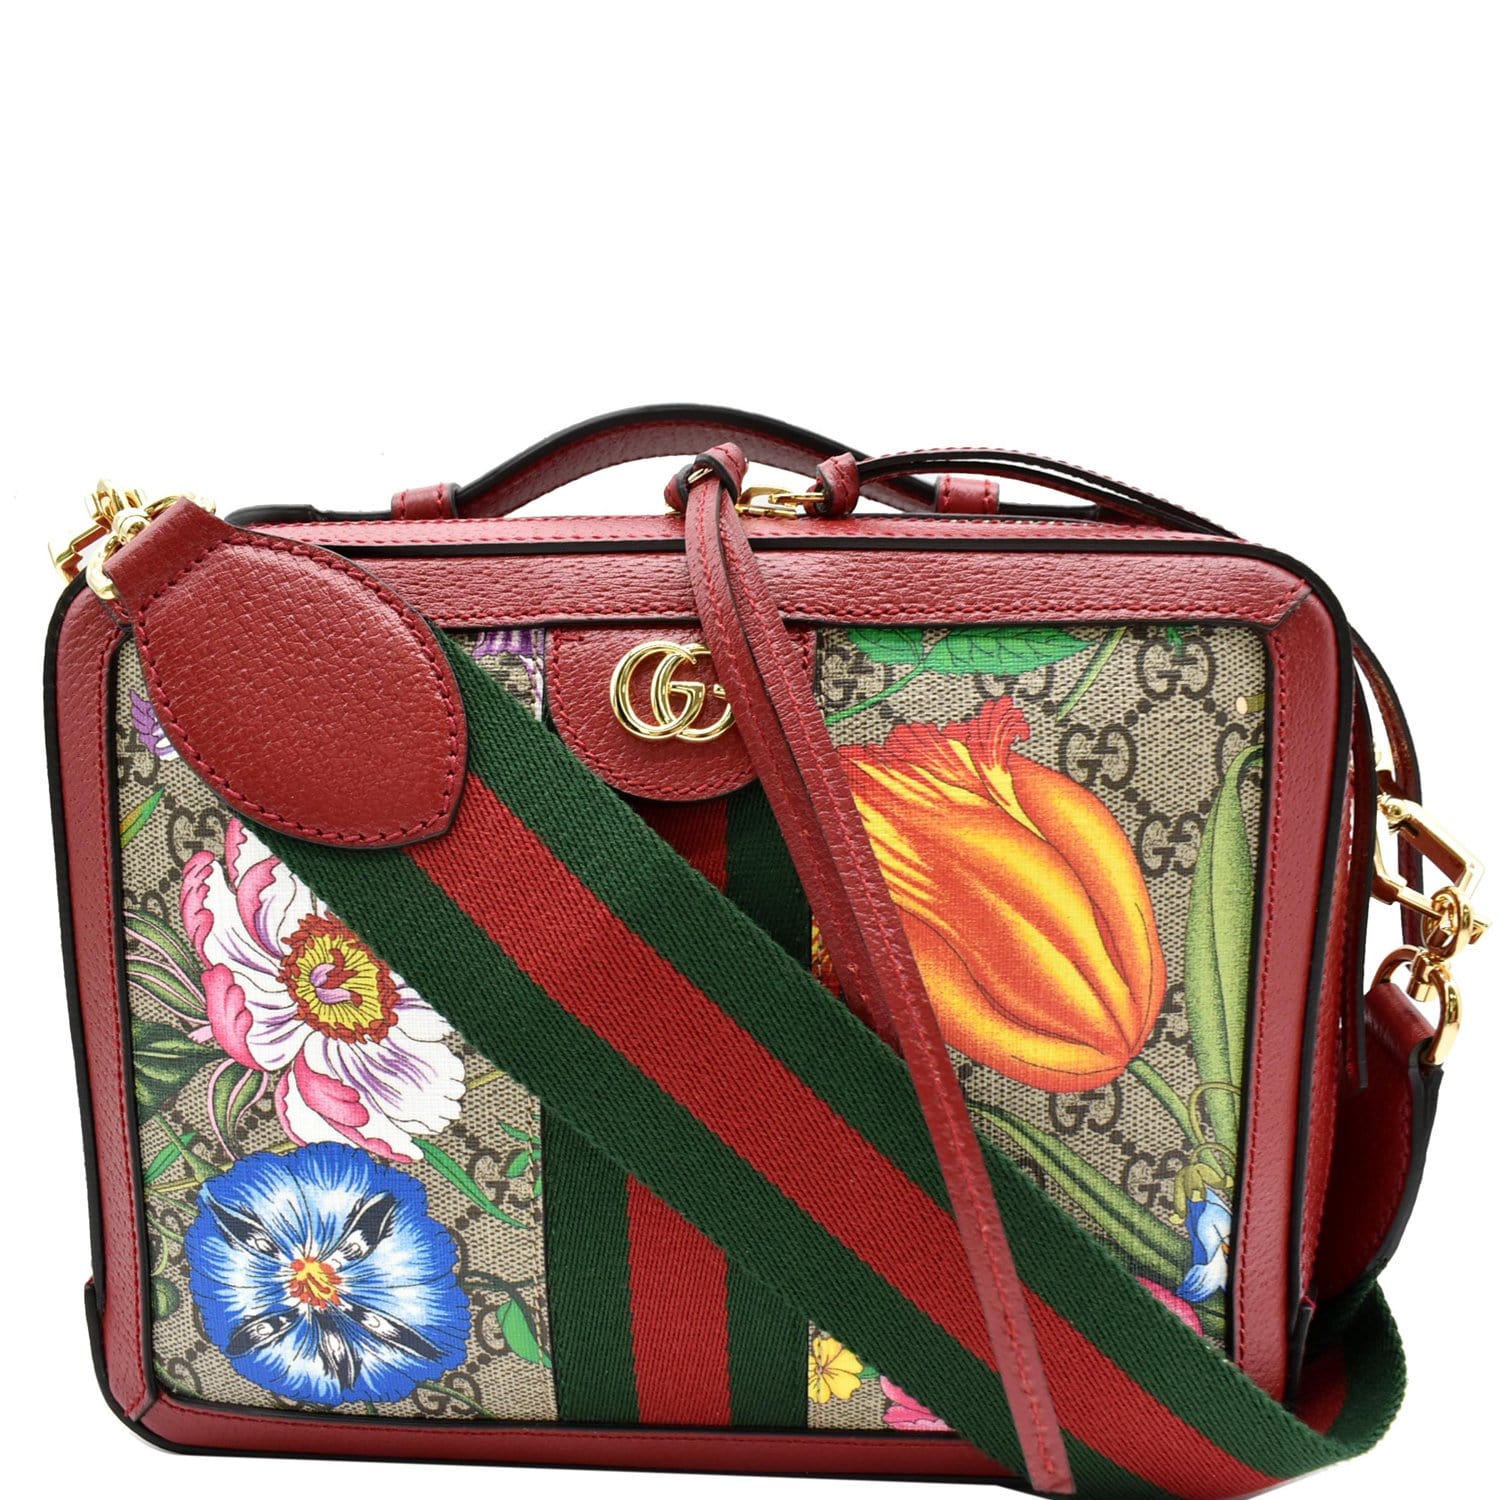 Gucci Ophidia Small Shoulder Bag Review 